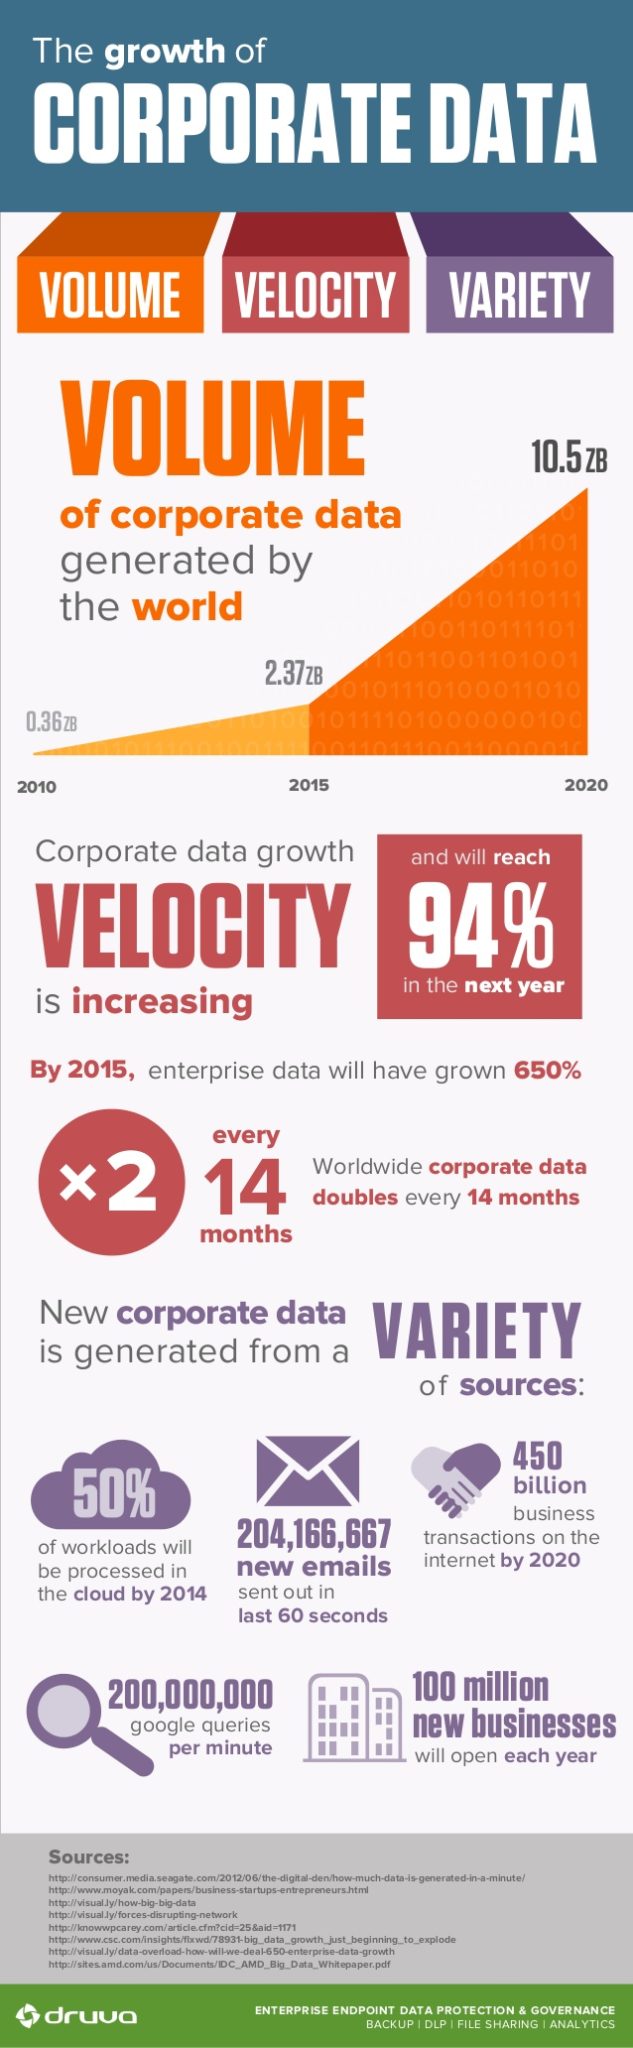 The growth of corporate data infographic